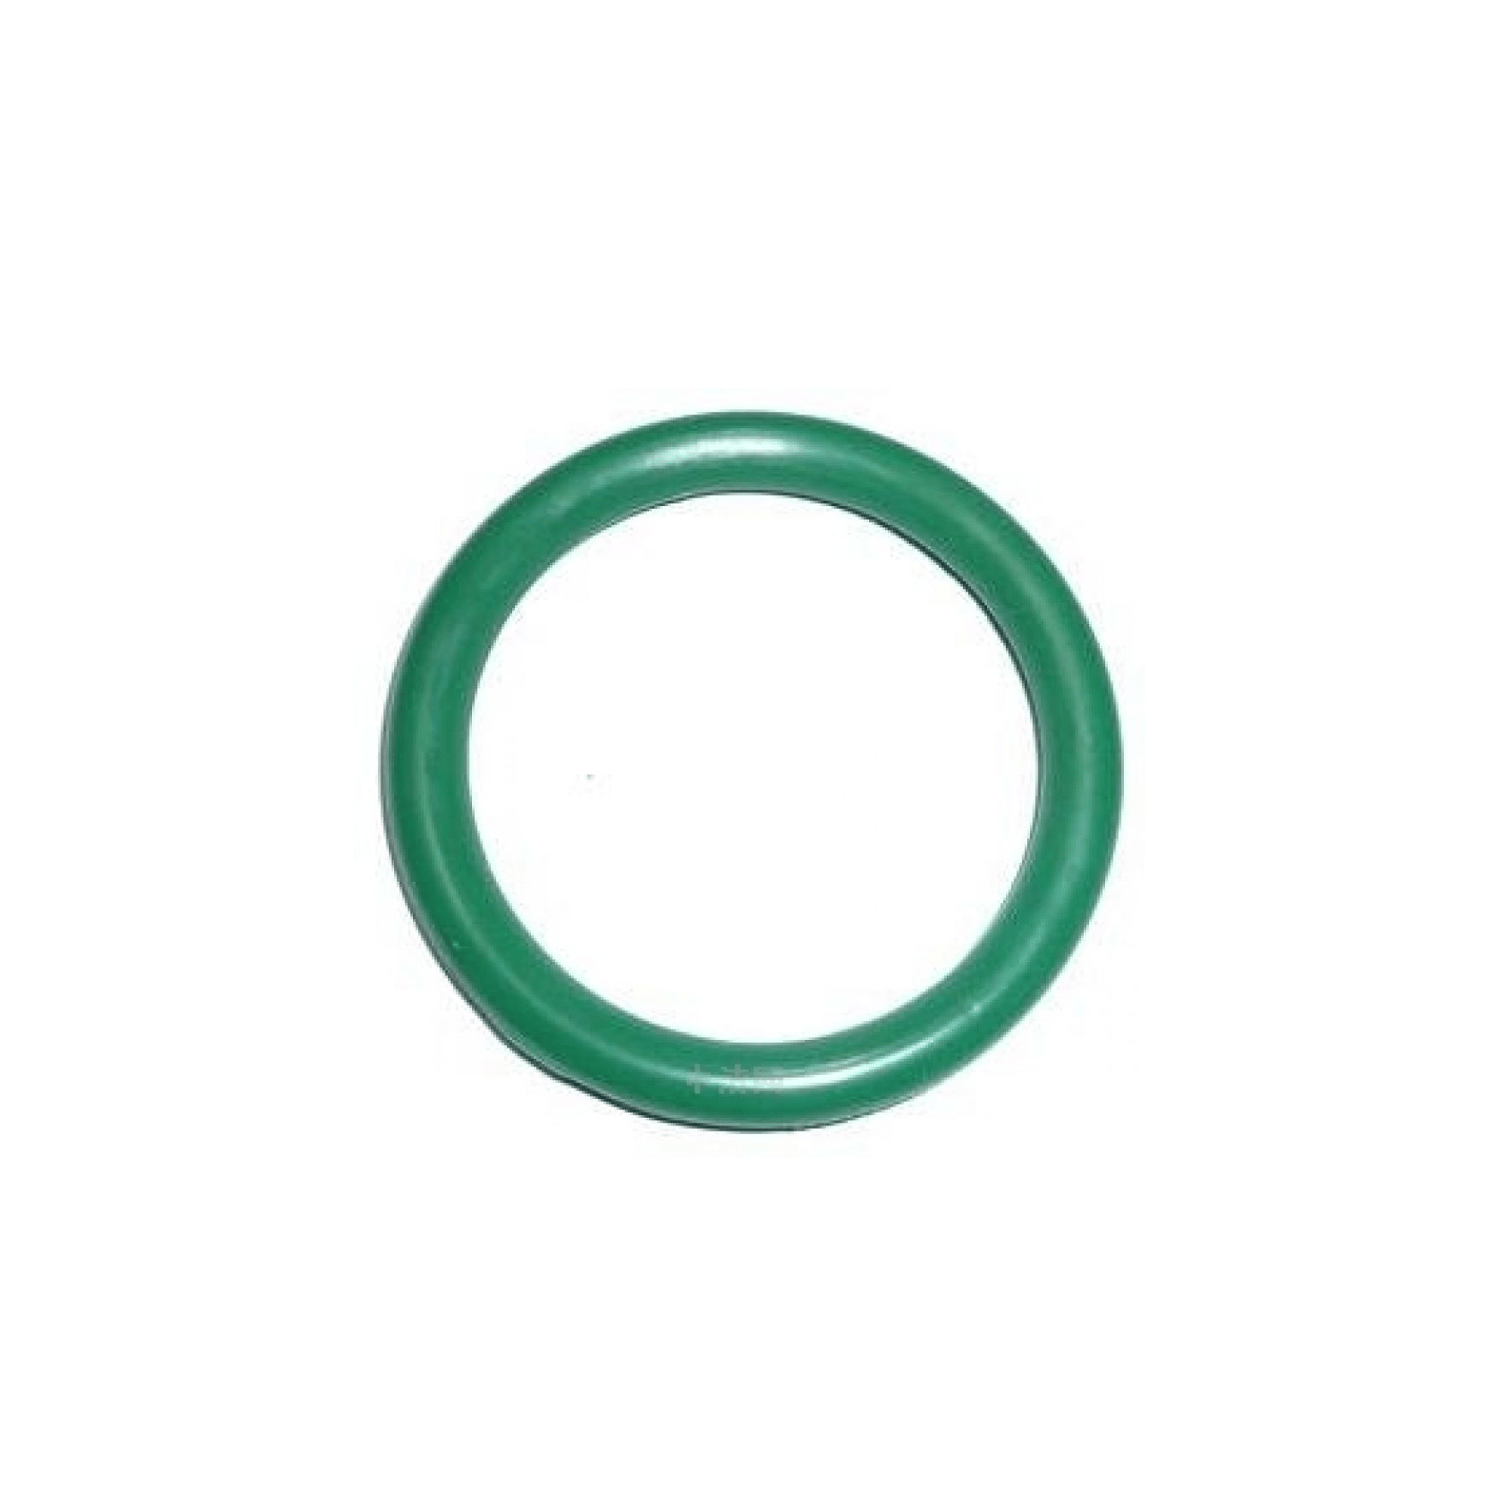 O-rings 13.9 x 1.8 mm 1 pc HNBR rubber, for air conditioning systems R12 & R134a